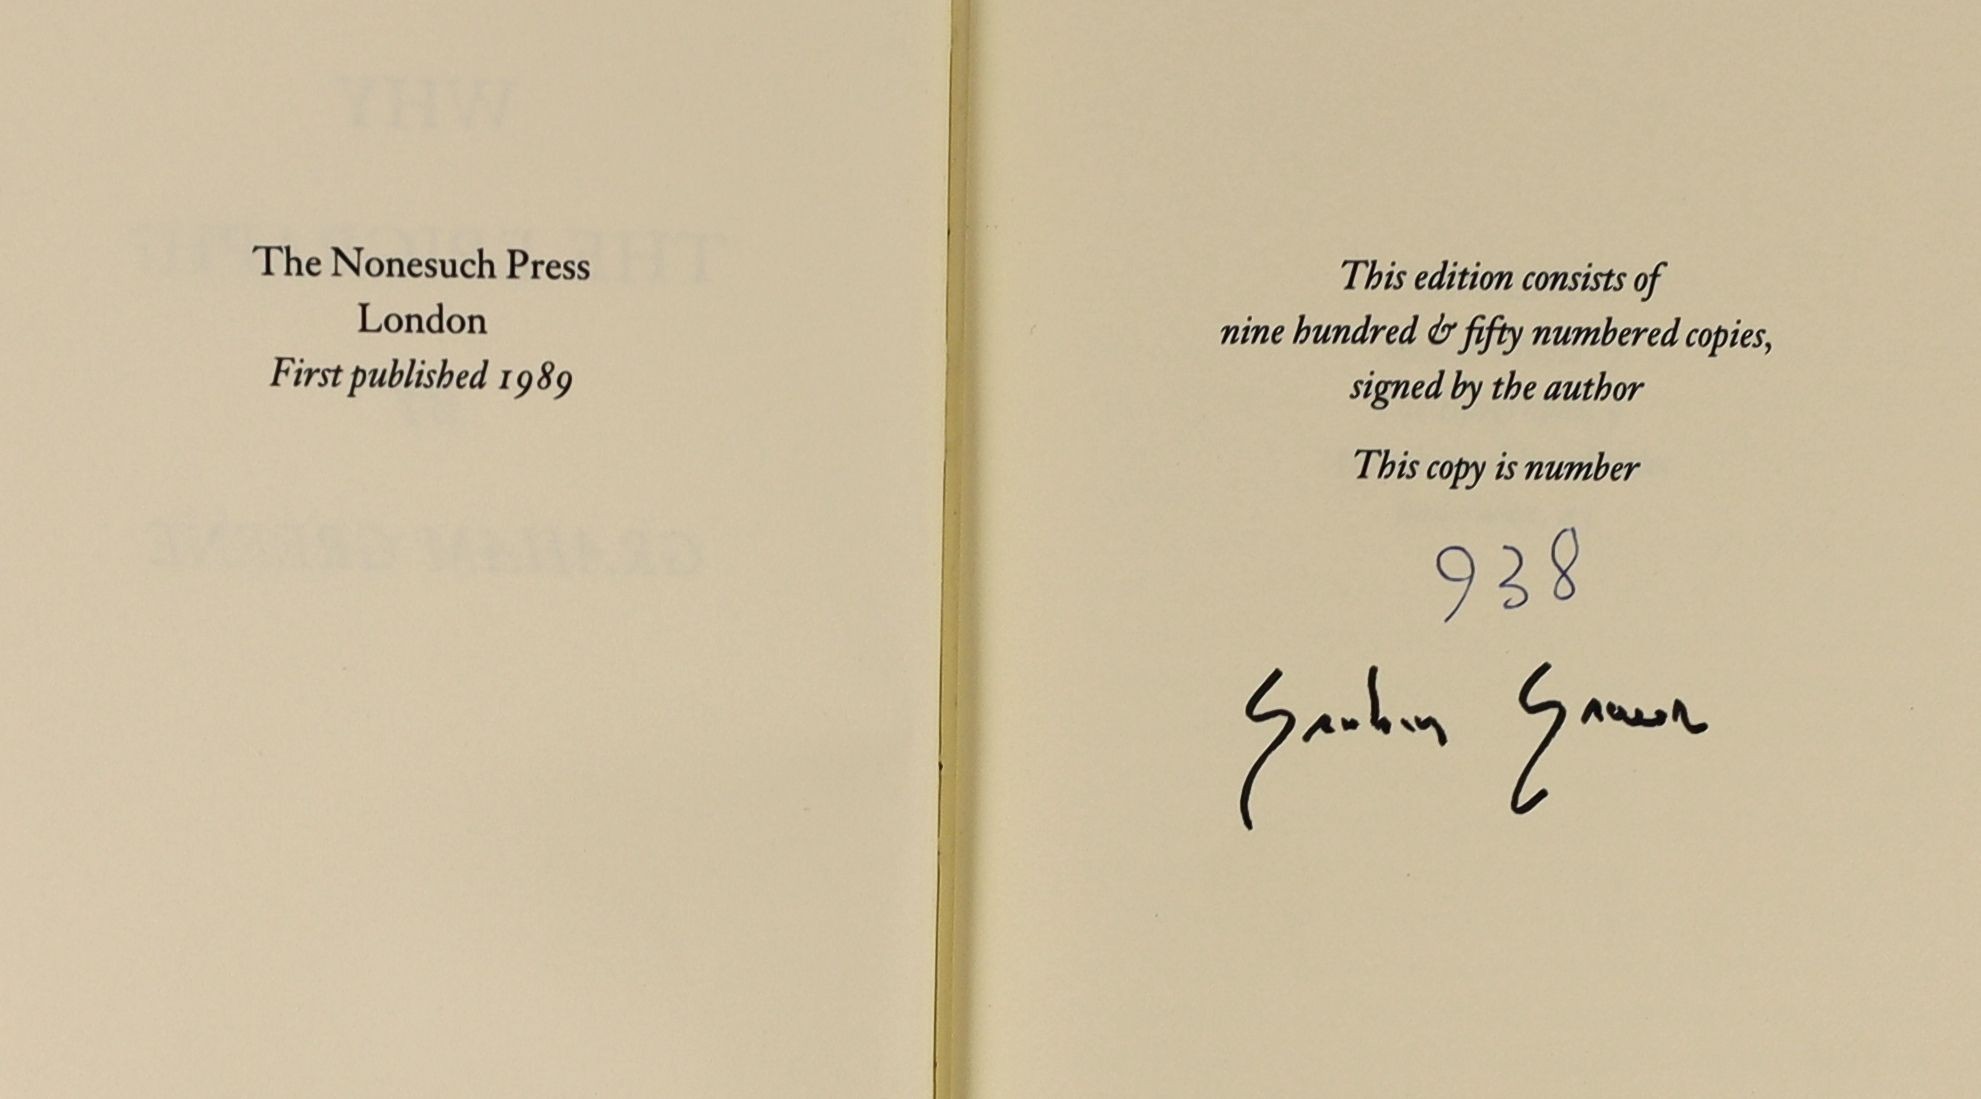 Nonesuch Press - Greene, Graham - Why the Epigraph?, one of 950, signed, 8vo, cloth gilt, London, 1989